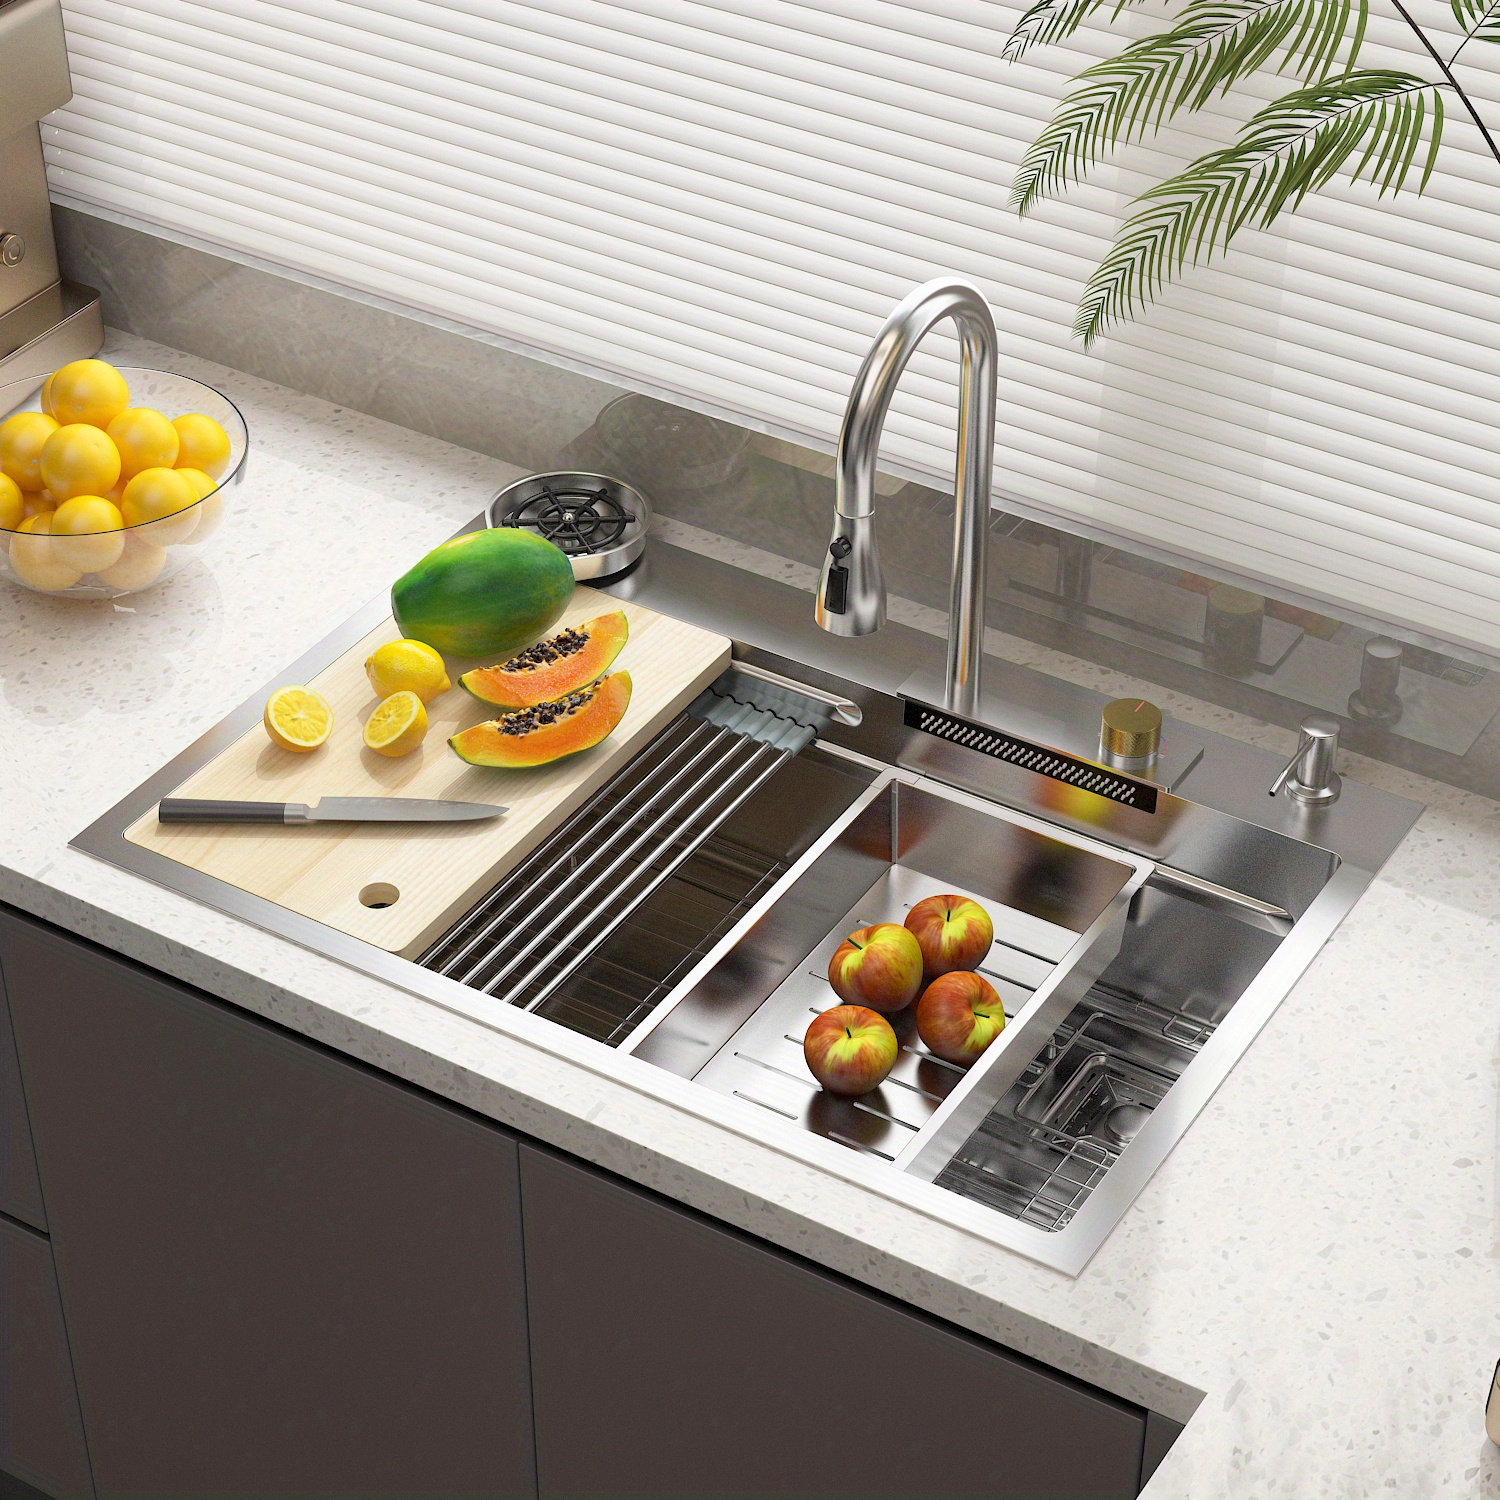 

Stainless Steel Kitchen Sink Set With Pull-out Faucet And Waterfall (33.2''w X 22.7''d X 8.9''h)